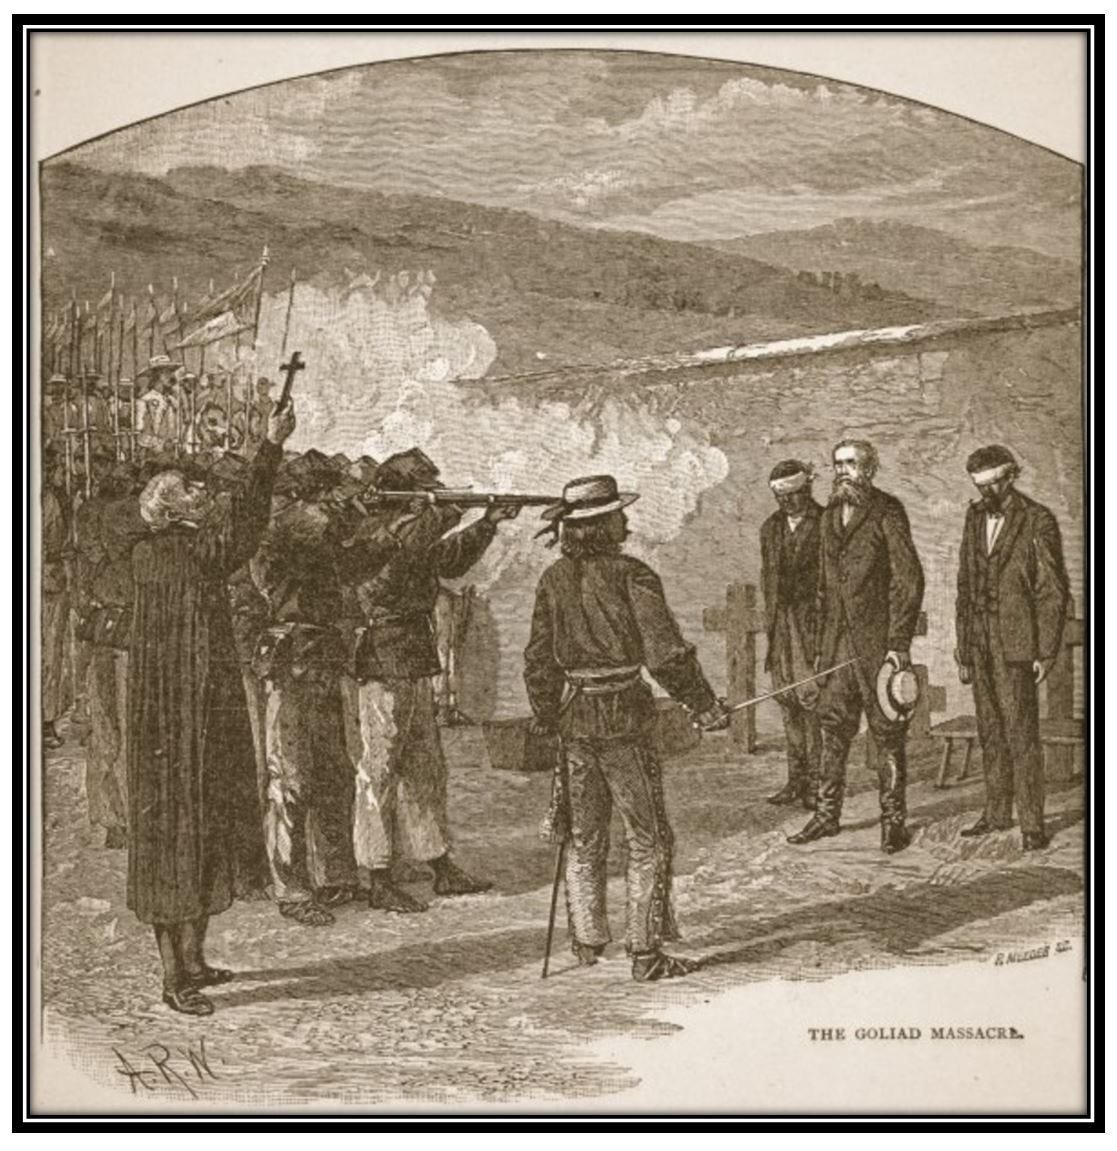 "The Goliad Massacre," by Alfred R. Waud